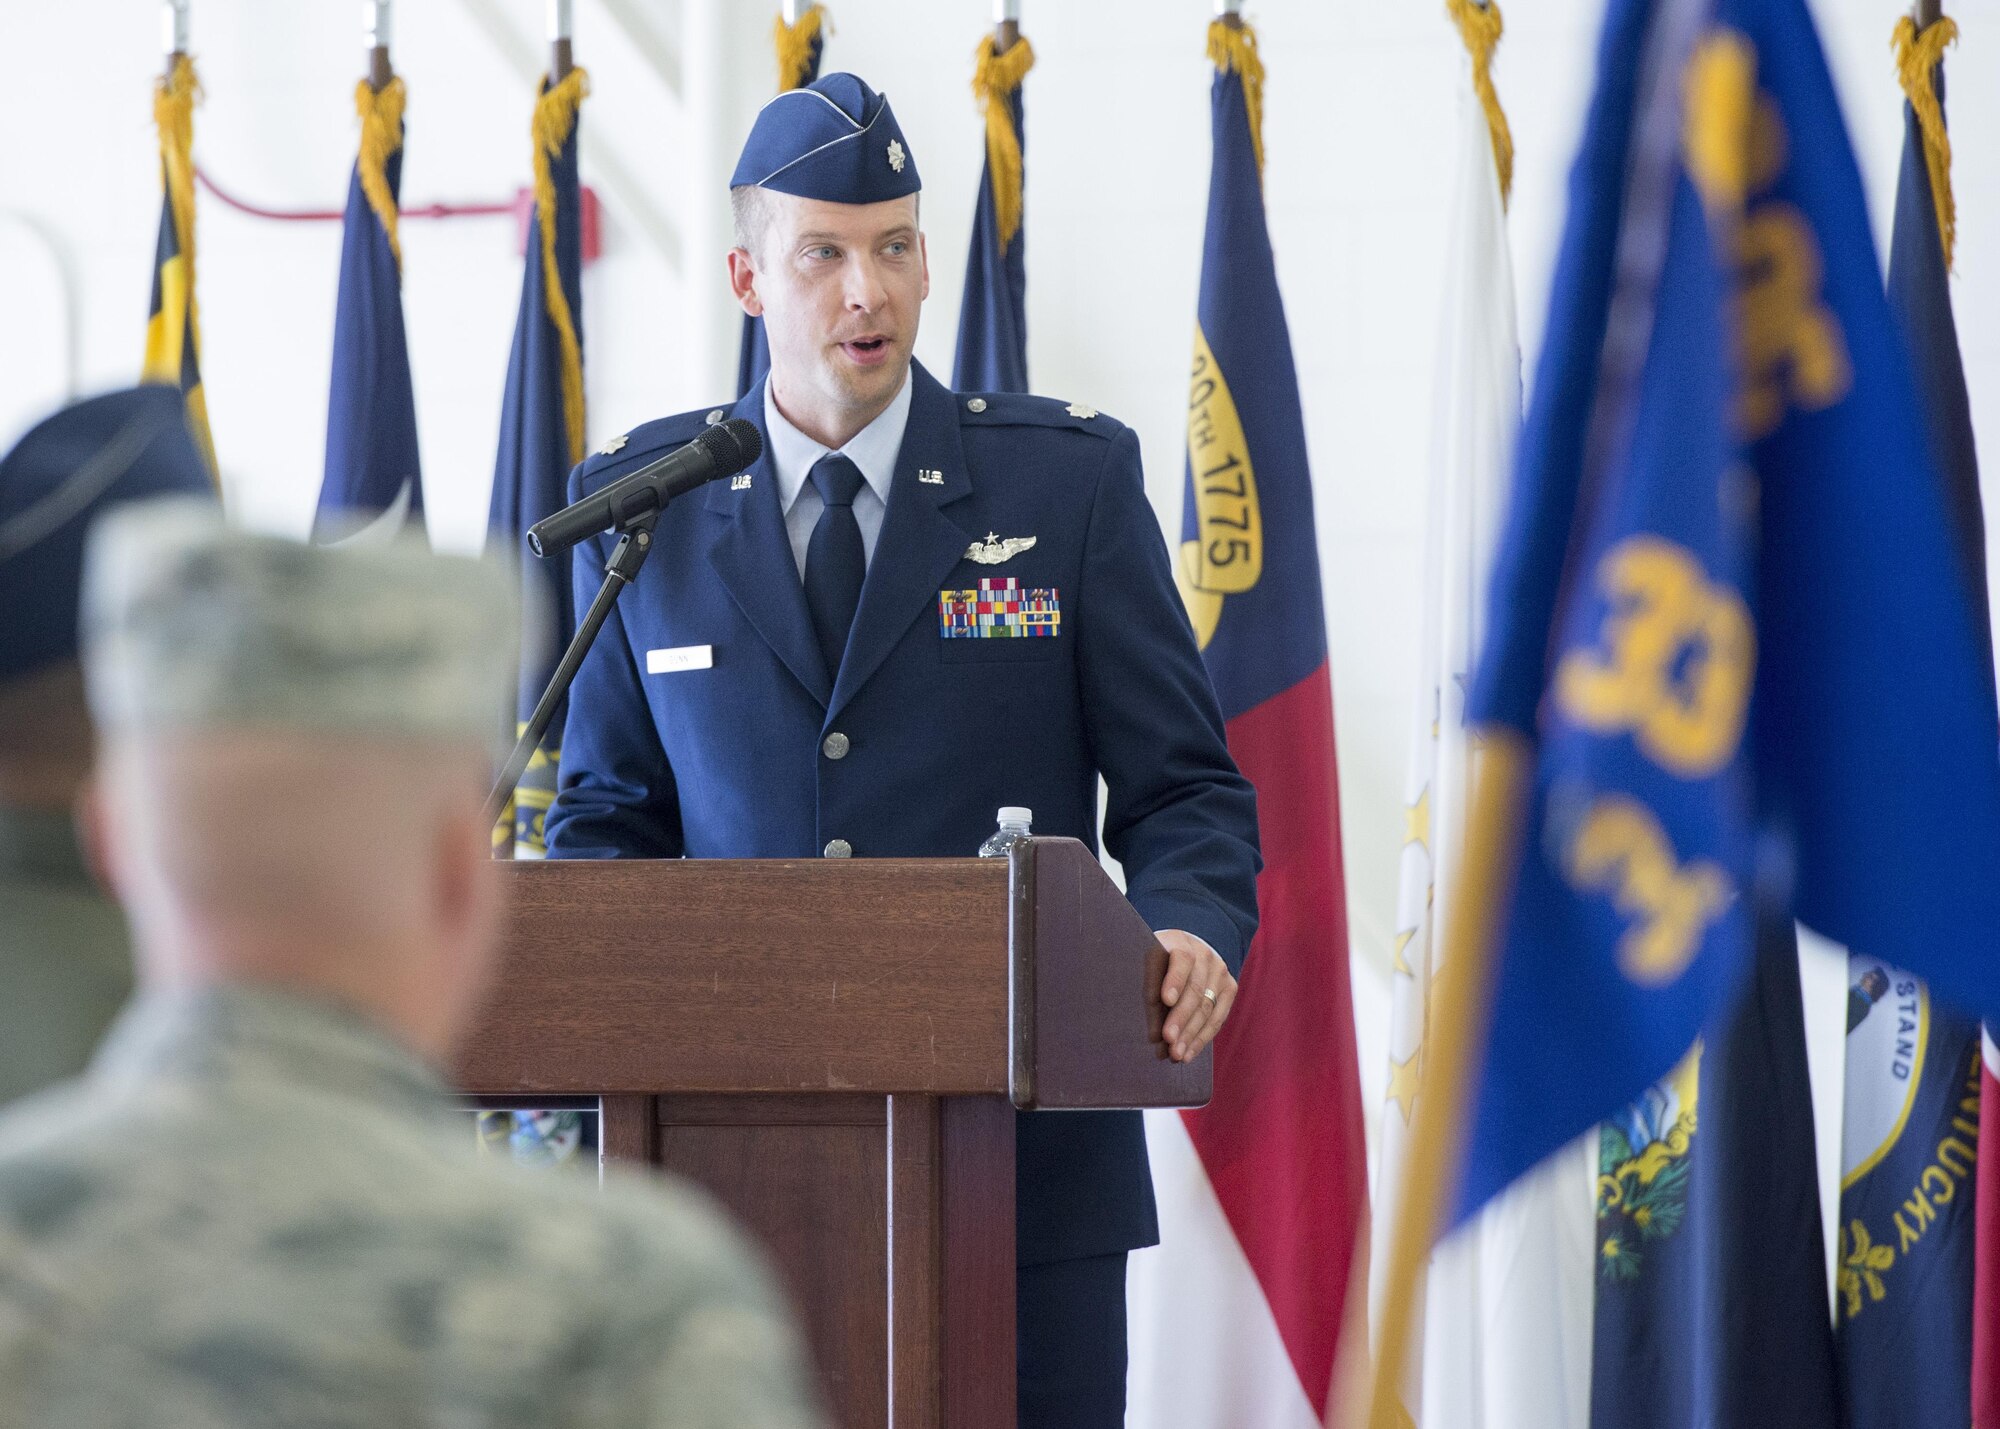 Lt. Col. Scott Gunn, 33rd Operations Support Squadron commander, speaks to 33rd OSS Airmen during the 33rd OSS change of command ceremony June 24, 2016, at Eglin Air Force Base, Fla. The 33rd OSS oversees F-35 weapons and tactics training and aircrew flight equipment training at Eglin AFB as well as the training syllabus and operational intelligence training for both AFSOC and the F-35 program at Eglin AFB. (U.S. Air Force photo by Senior Airman Stormy Archer/Released)